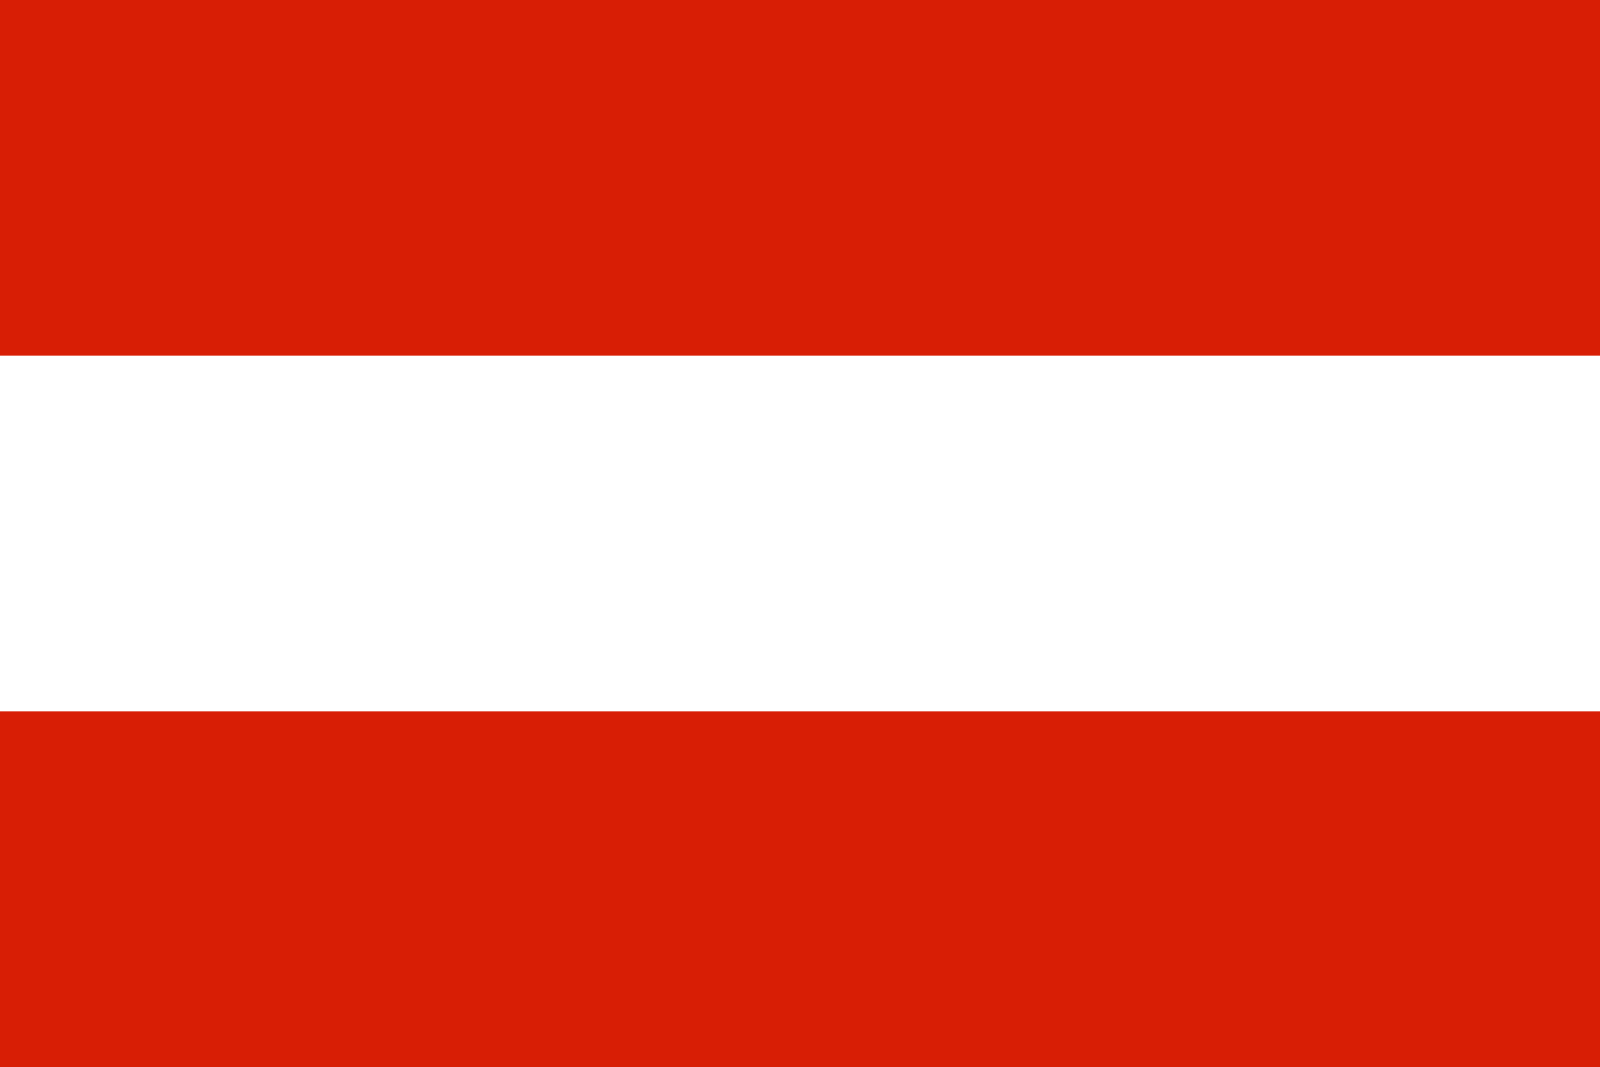 The Your Web Flag Of Austria